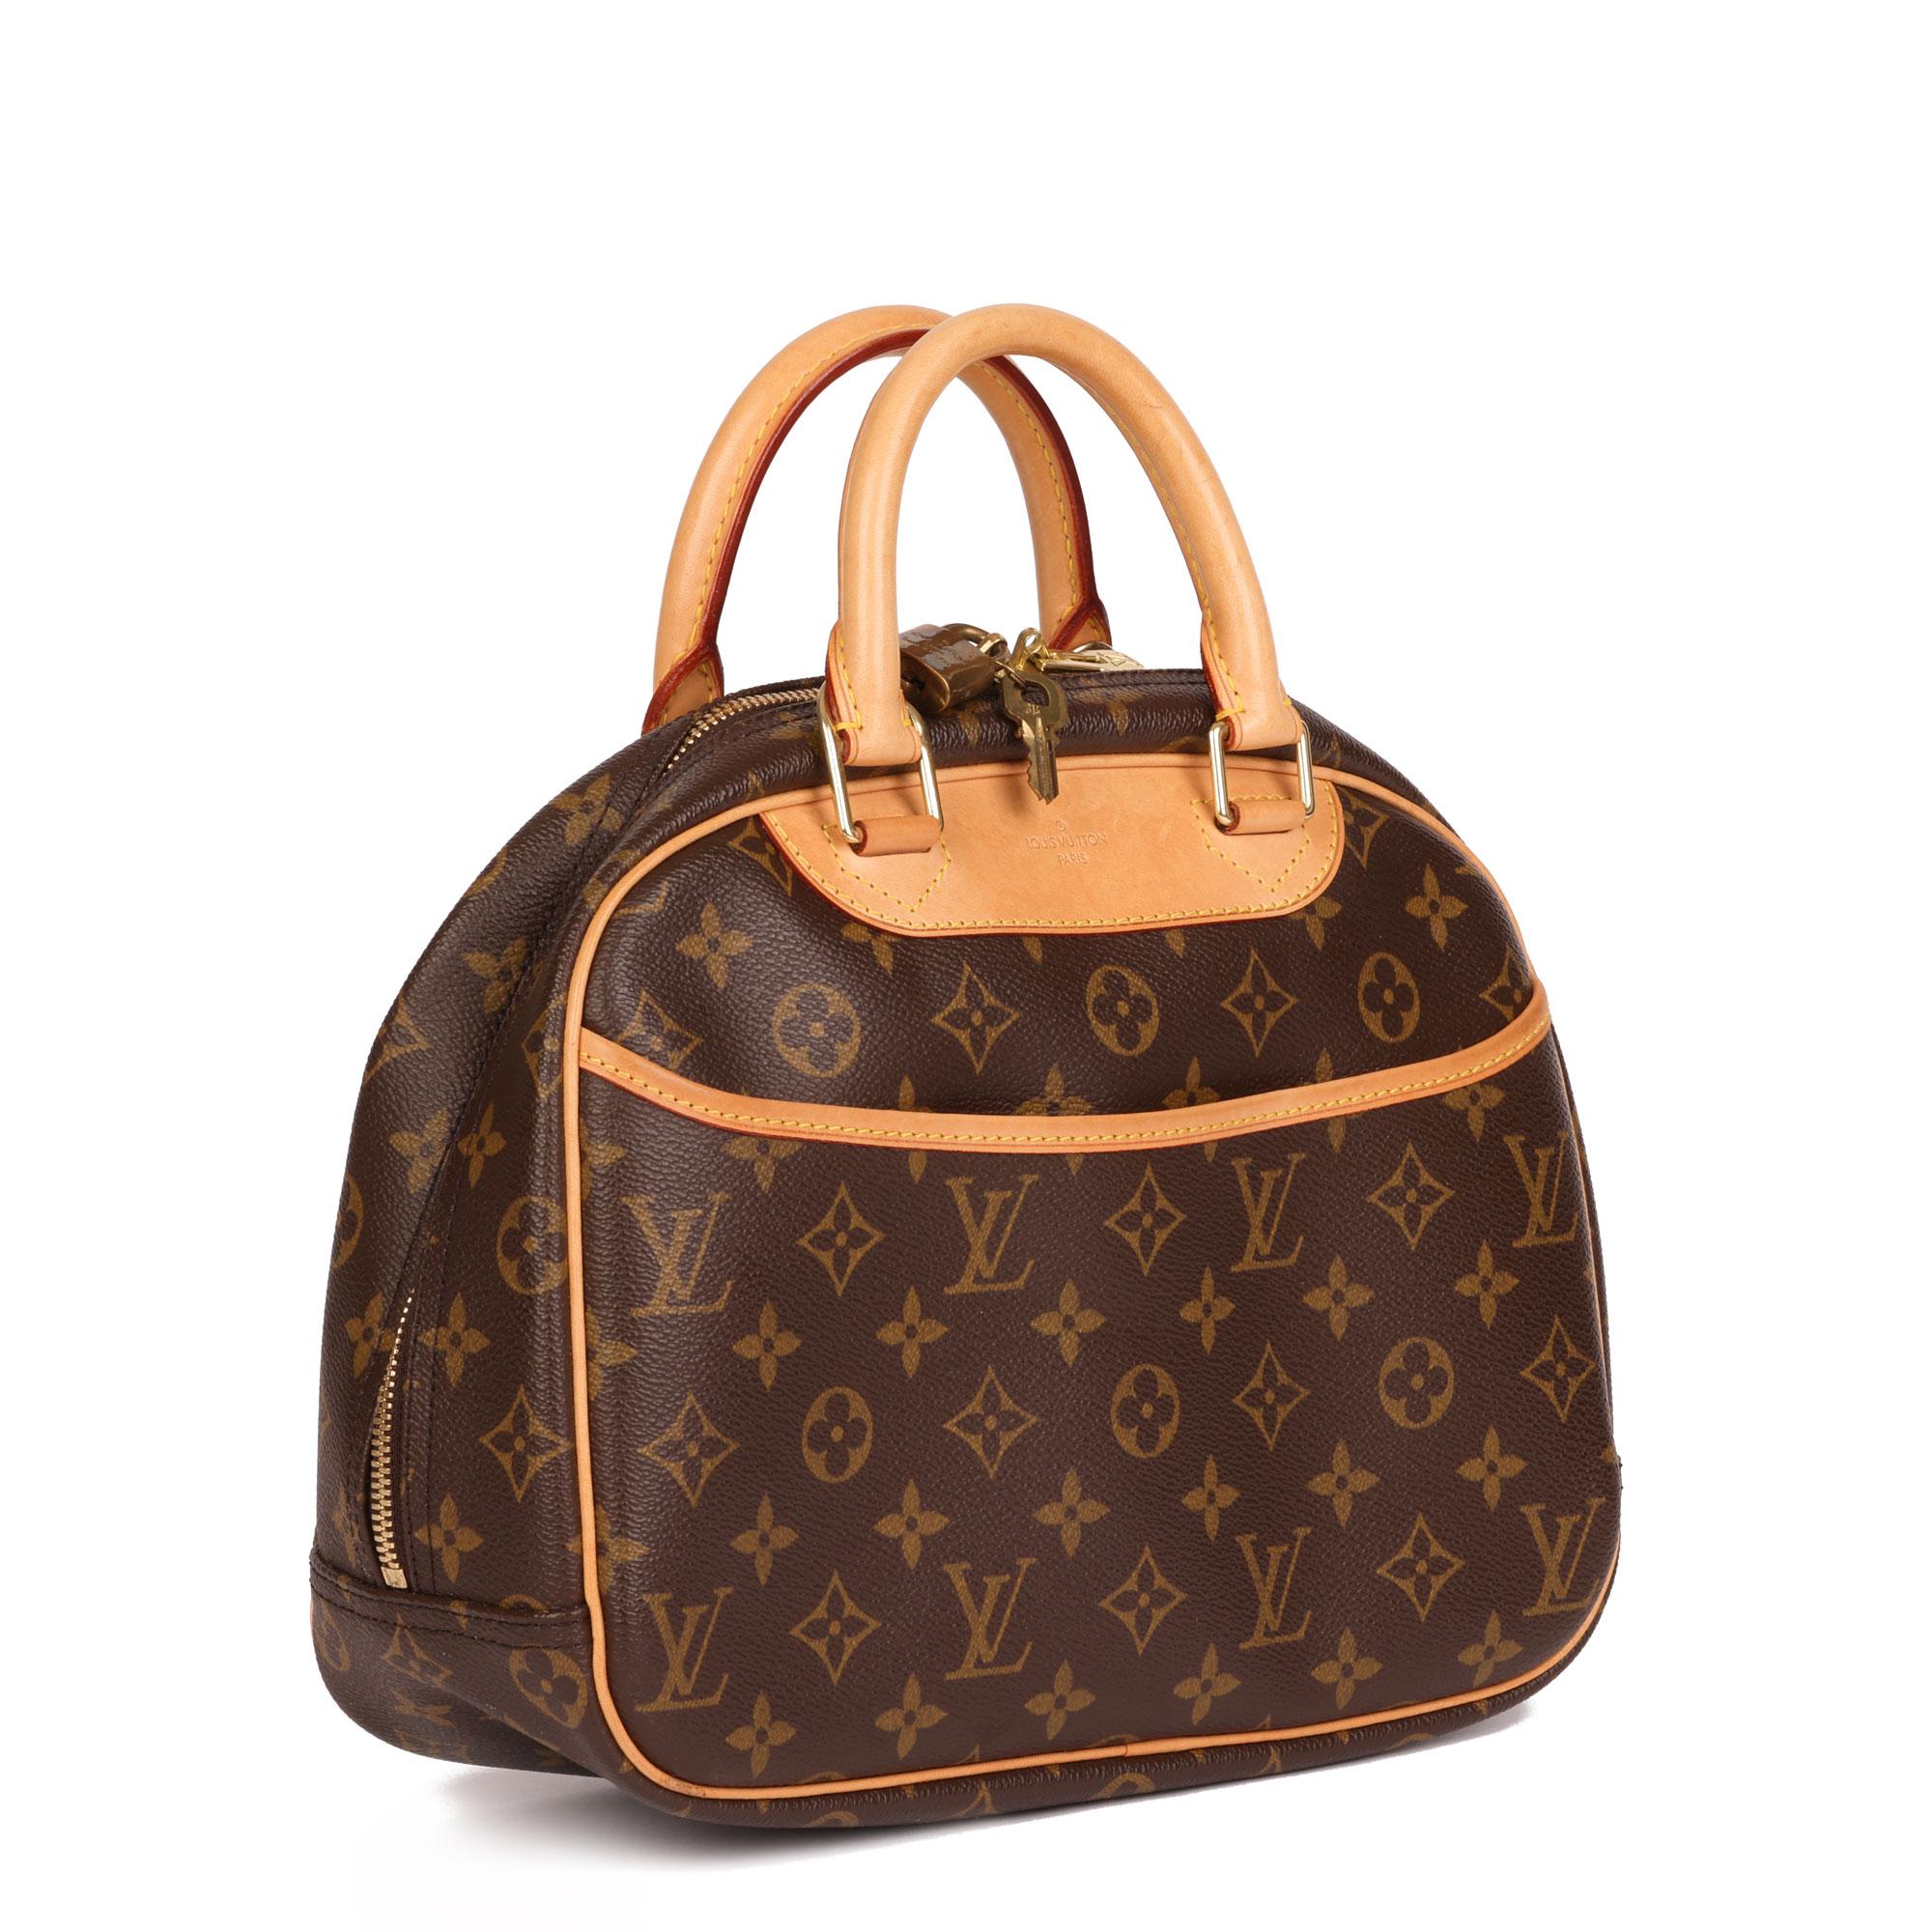 LOUIS VUITTON
Brown Monogram Coated Canvas & Vachetta Leather Trouville

Xupes Reference: CB486
Serial Number: SD0055
Age (Circa): 2005
Accompanied By: Louis Vuitton Dust Bag, Padlock, Keys
Authenticity Details: Date Stamp (Made in France)
Gender: